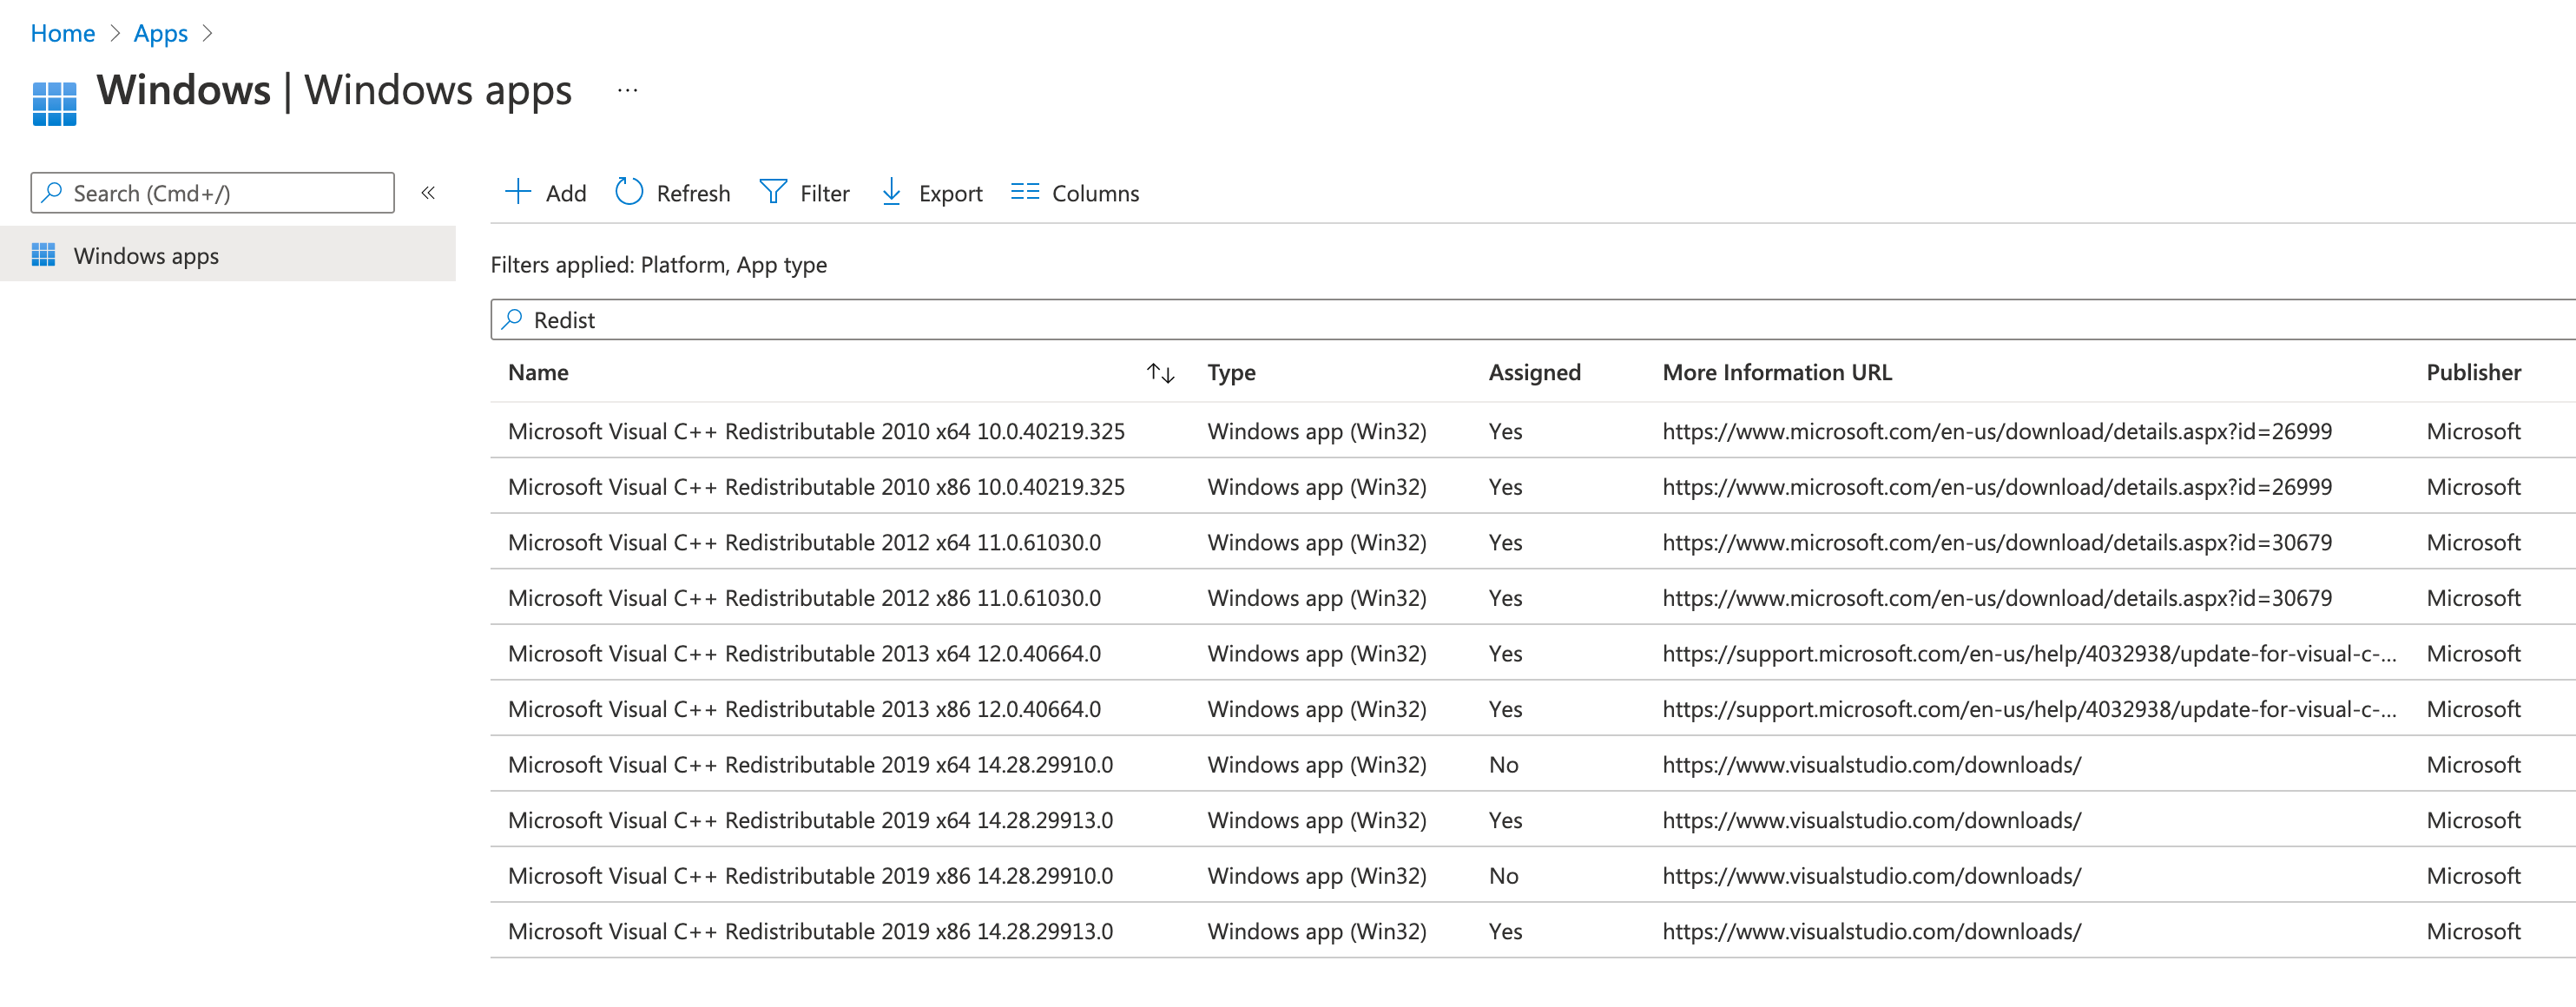 Microsoft Visual C++ Redistributables applications imported into Microsoft Intune